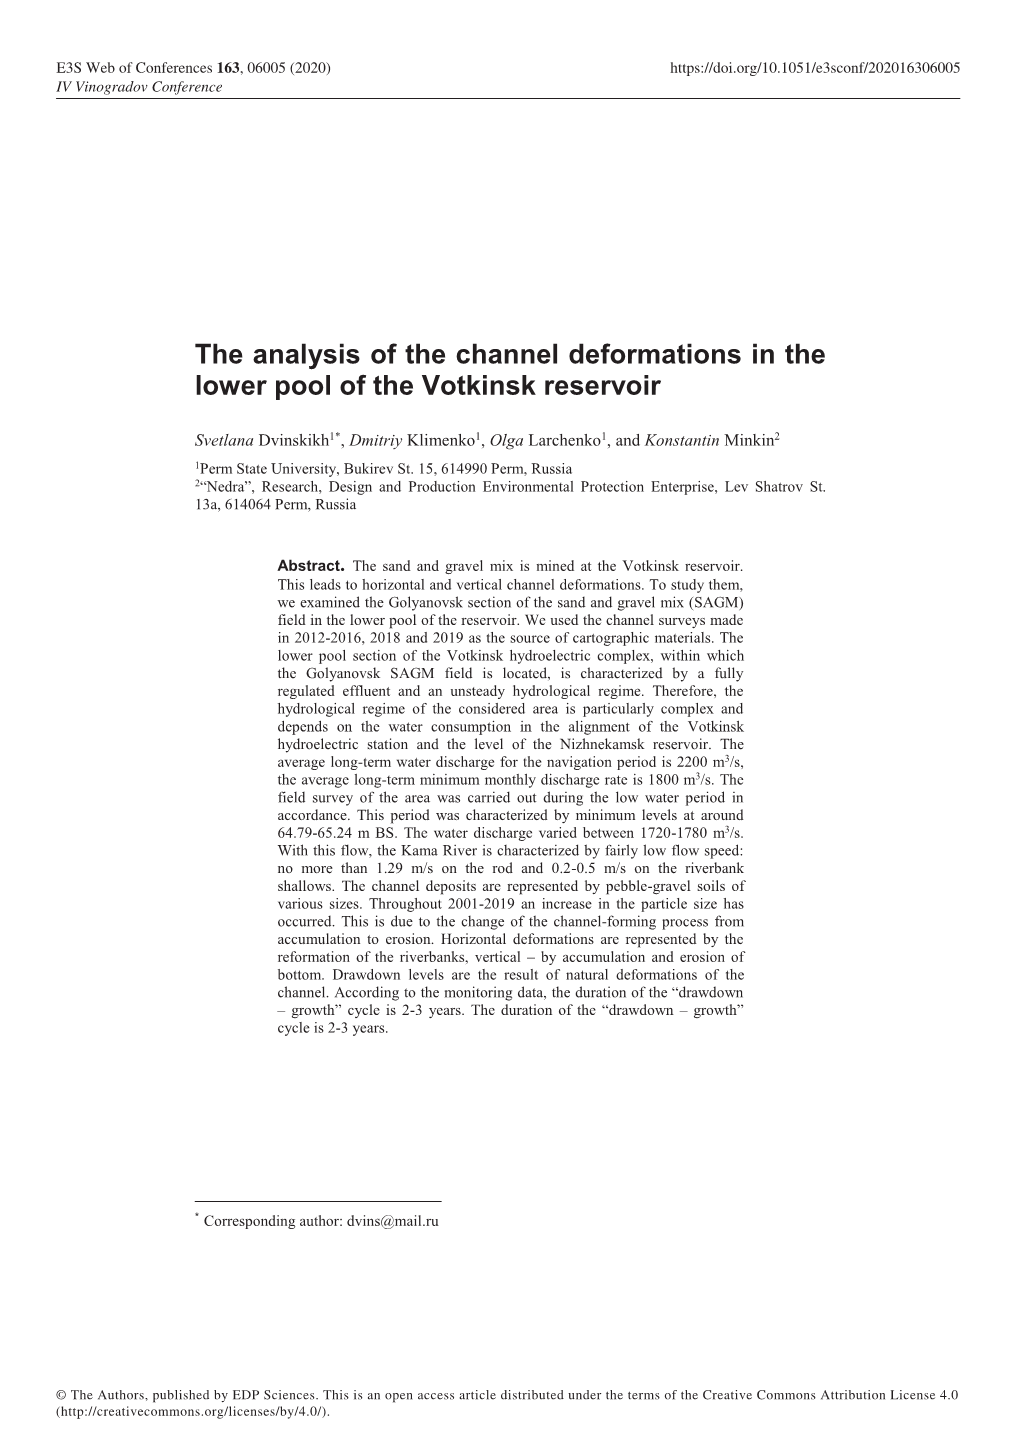 The Analysis of the Channel Deformations in the Lower Pool of the Votkinsk Reservoir